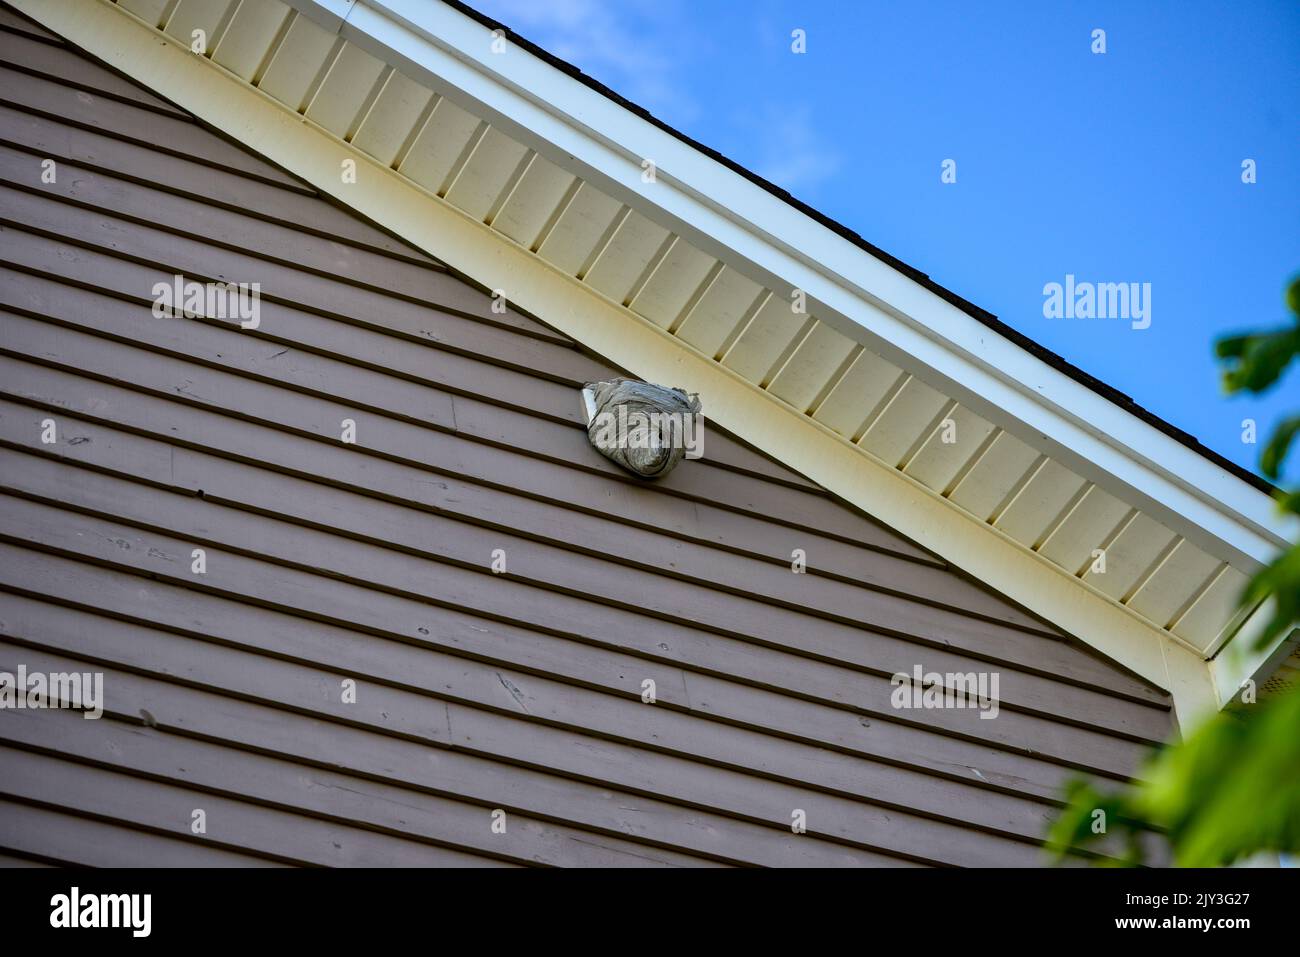 A large wasp hornet nest is affixed to an exterior dryer vent cover on the eave of a wooden building. The pesky insects are on the outside. Stock Photo